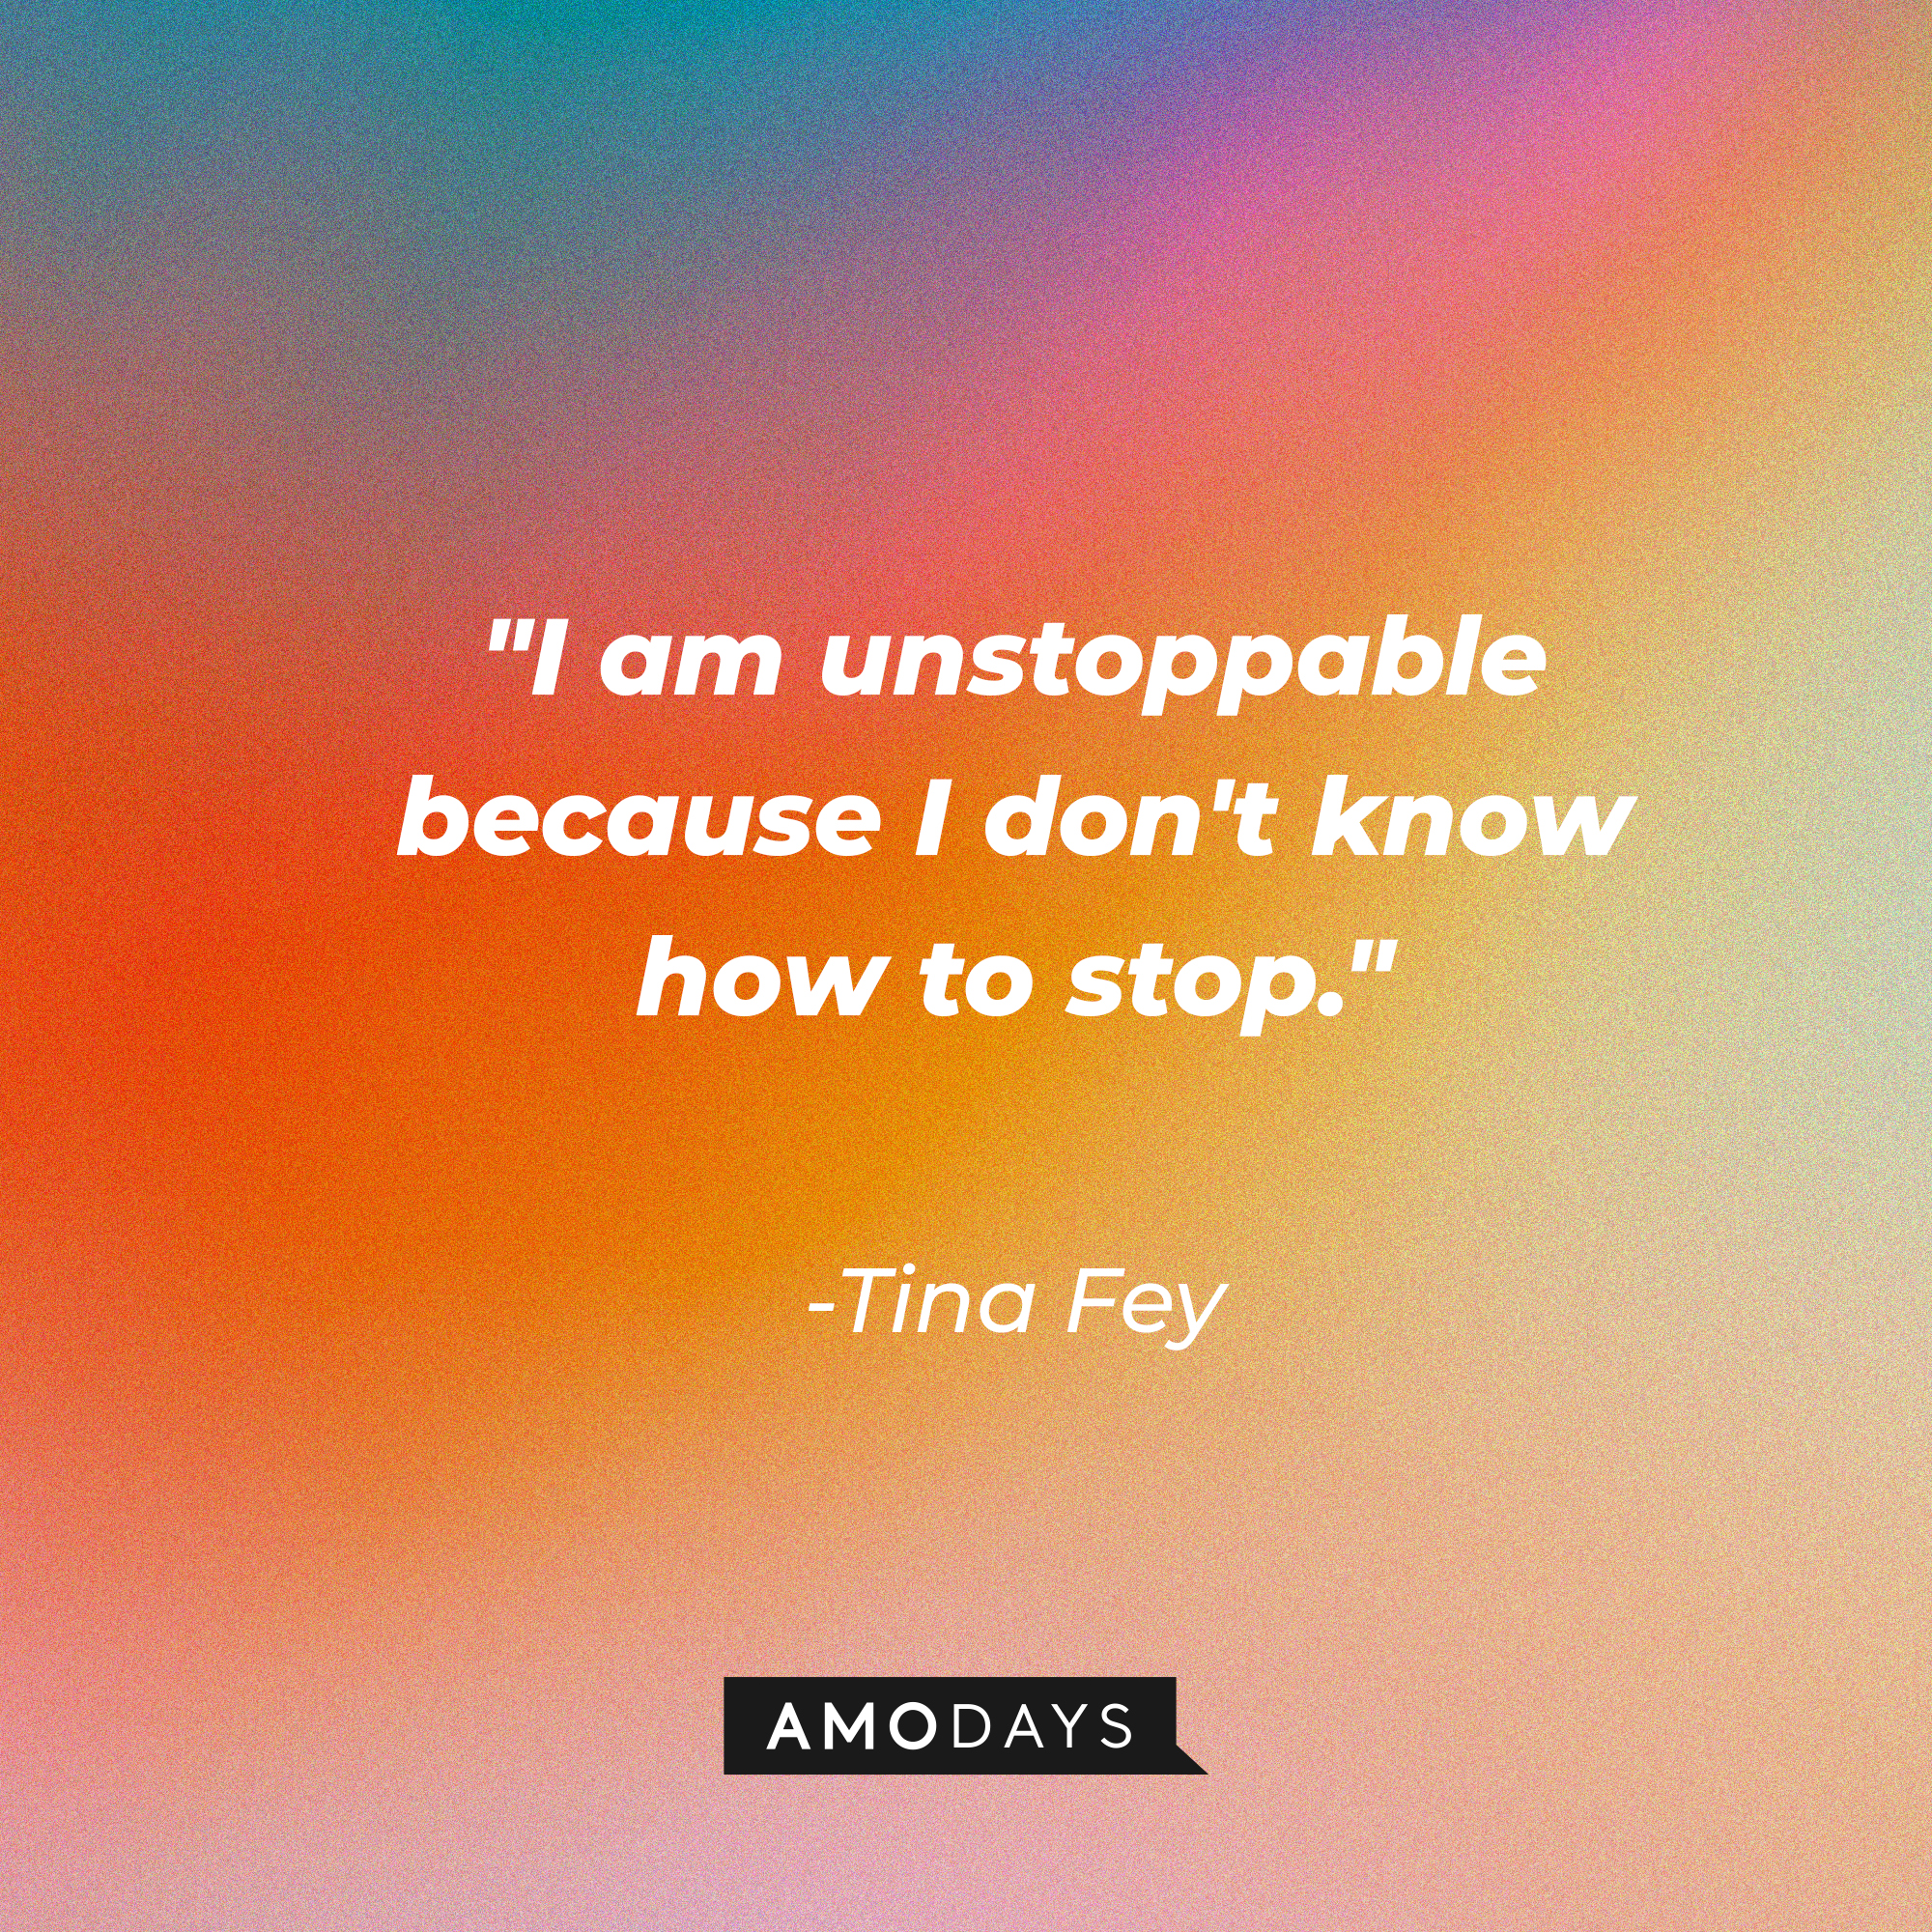 Tina Fey's quote: "I am unstoppable because I don't know how to stop." | Source: AmoDays